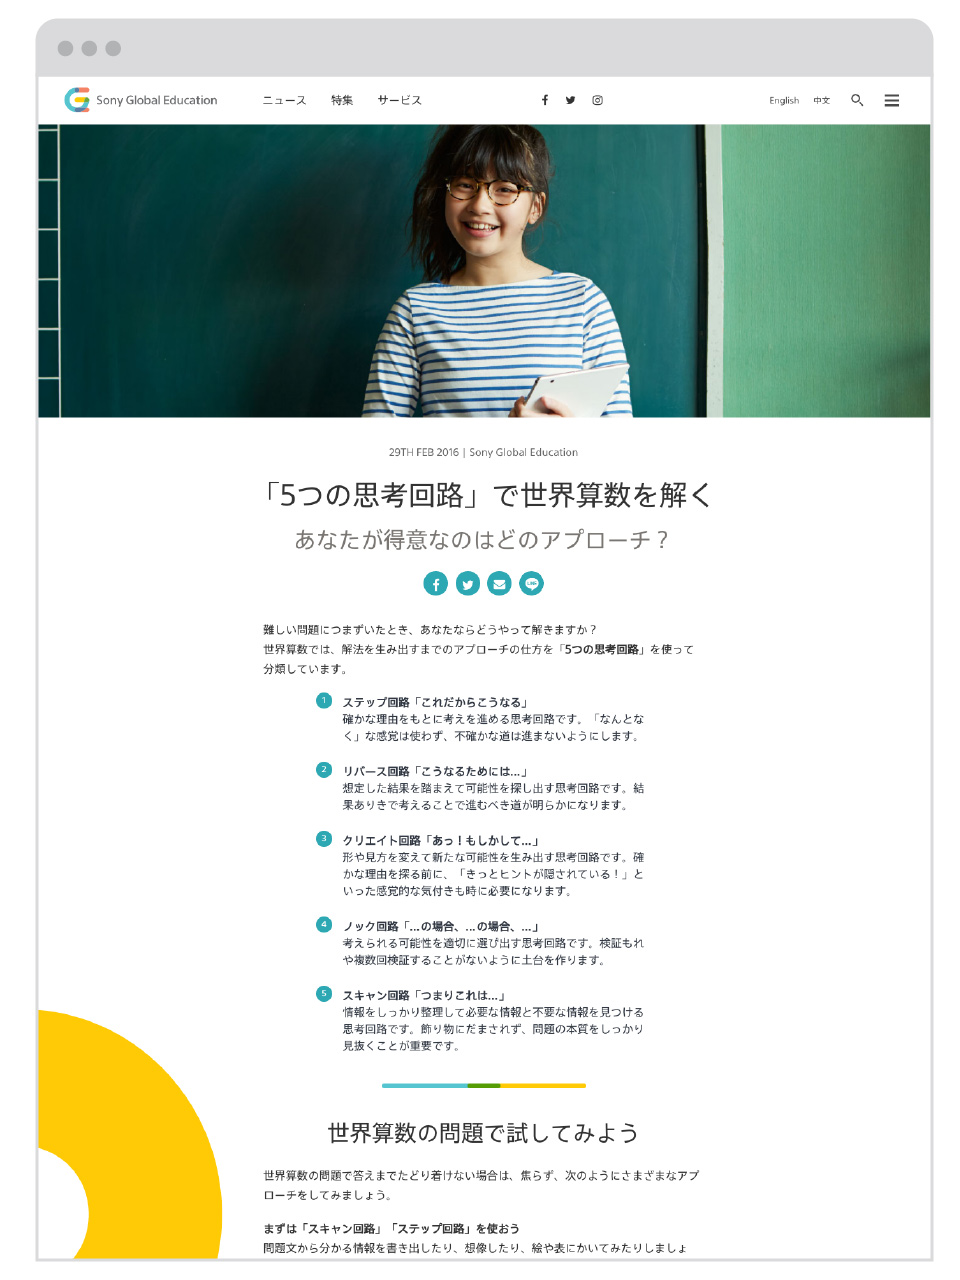 Sony Global Education - Sony Global Education - Japanese Article Page